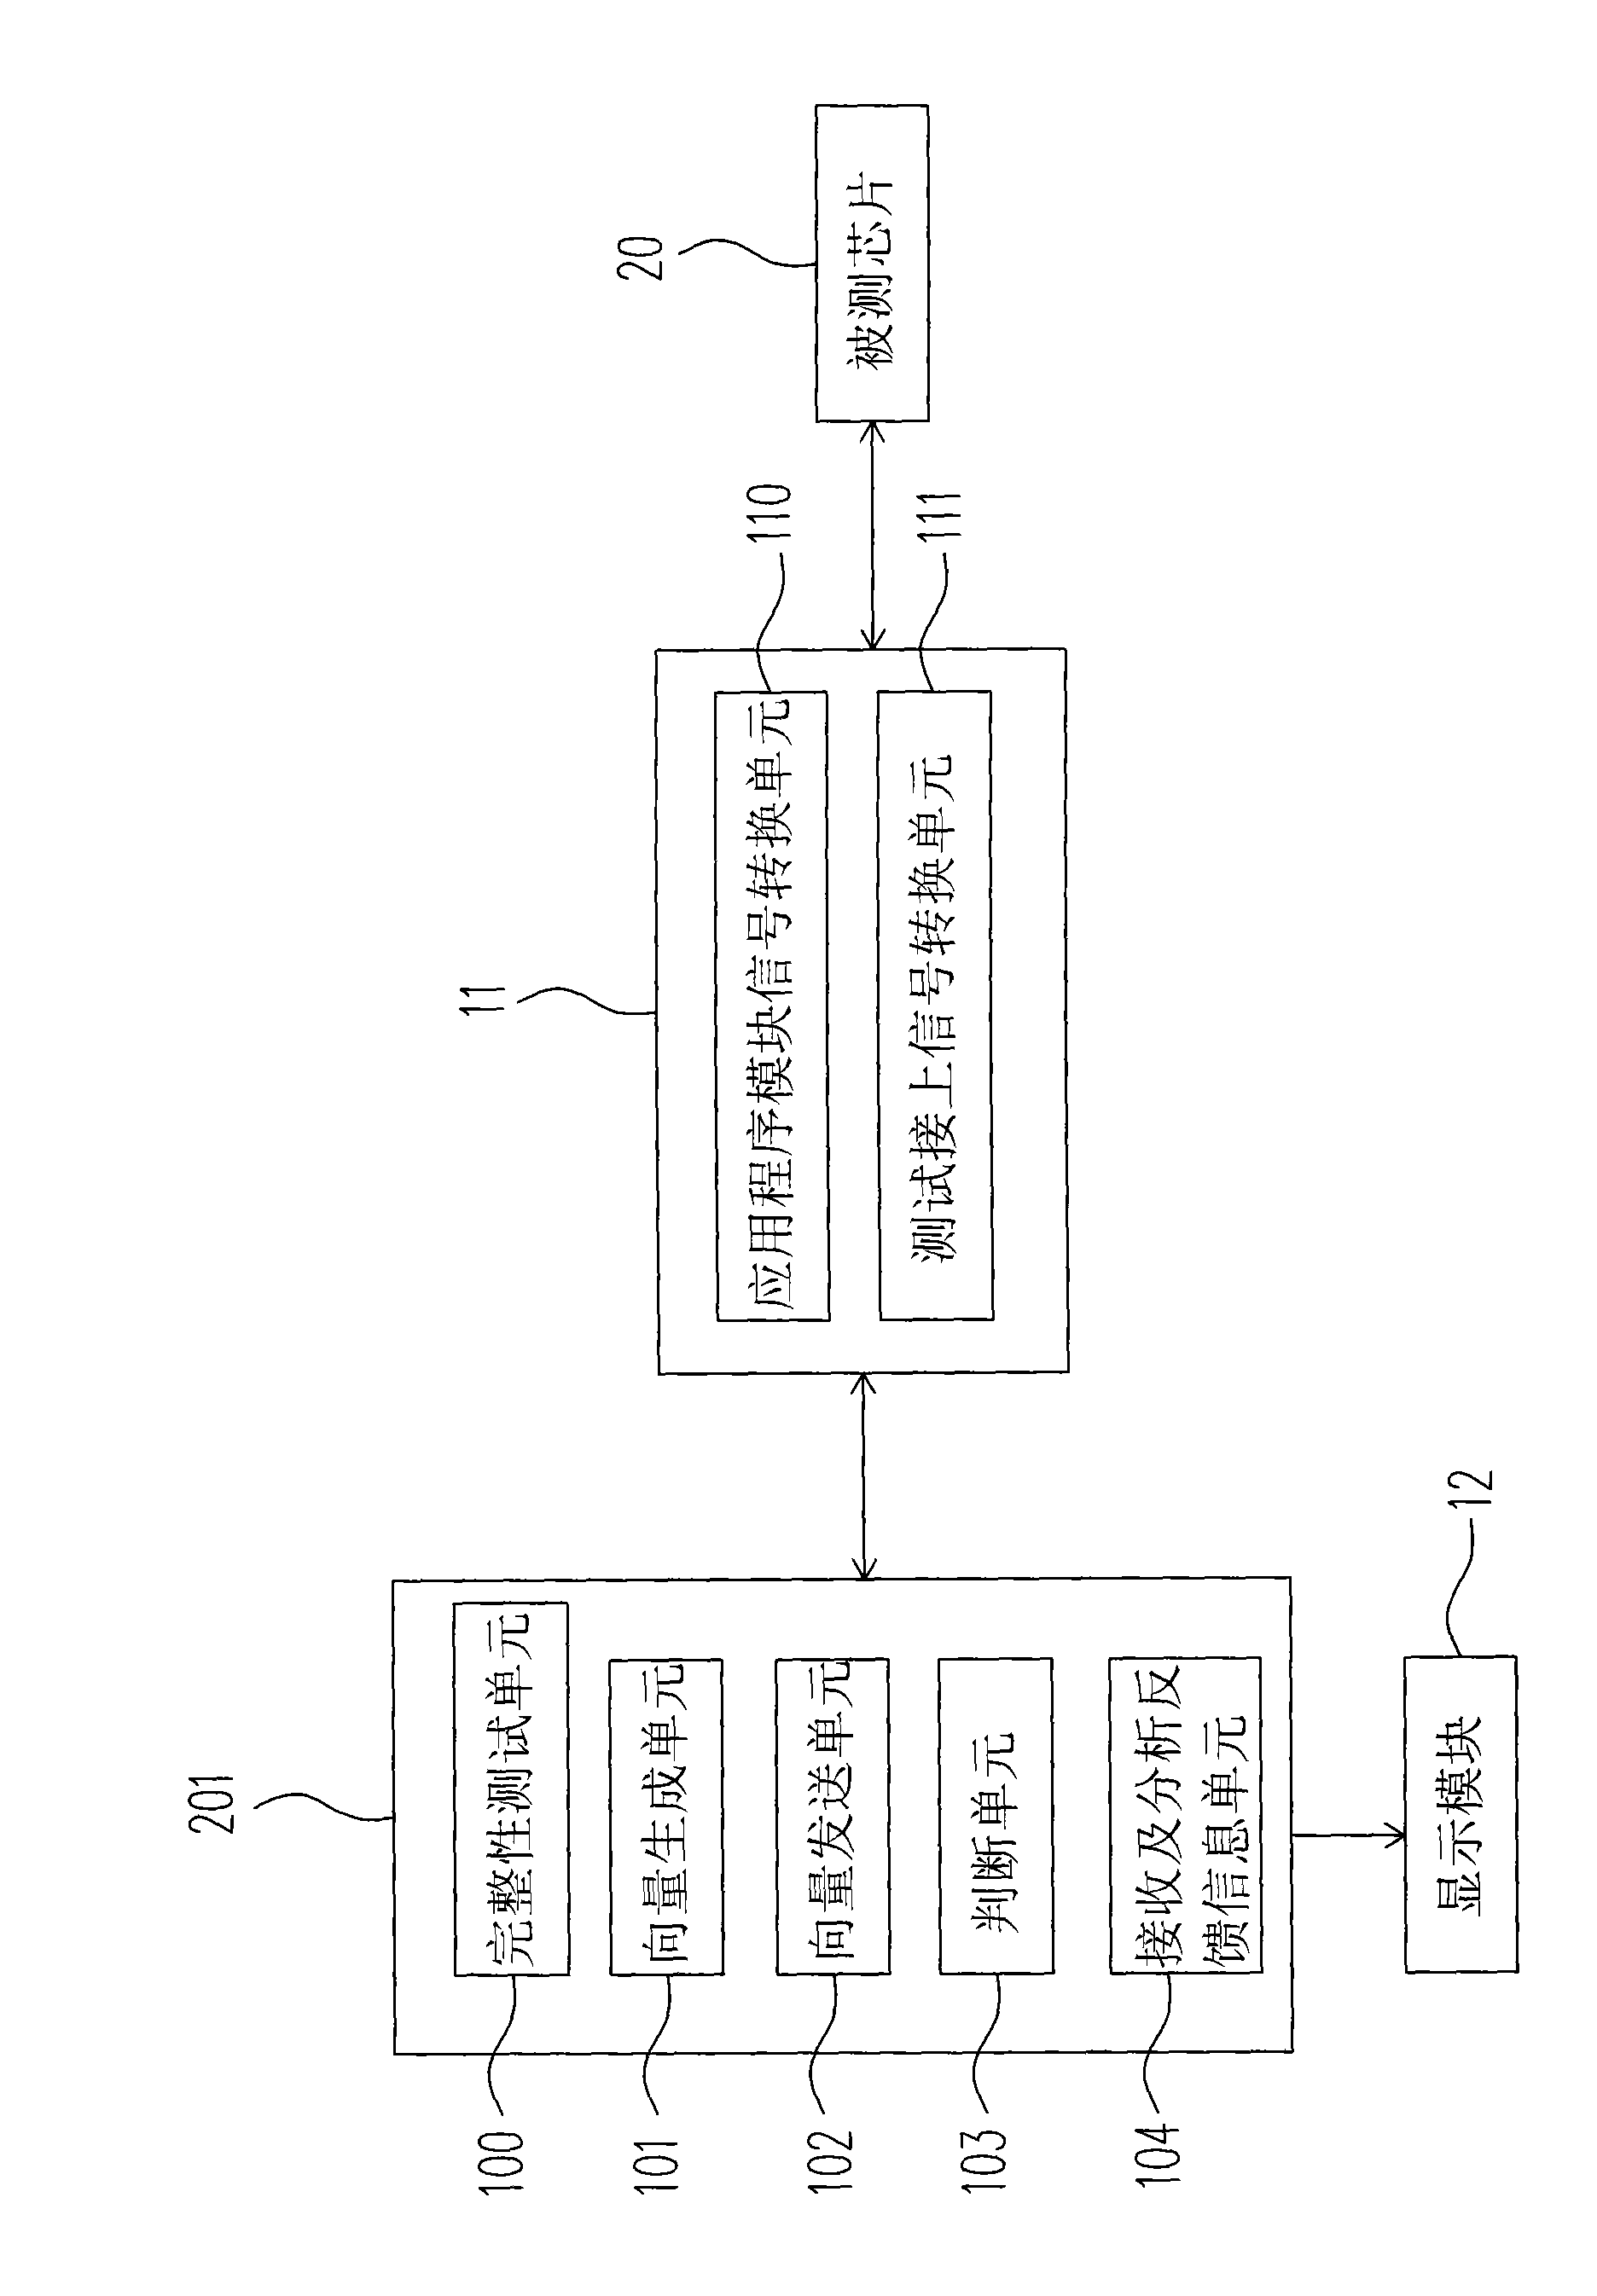 Boundary scanning chip failure detection device and method